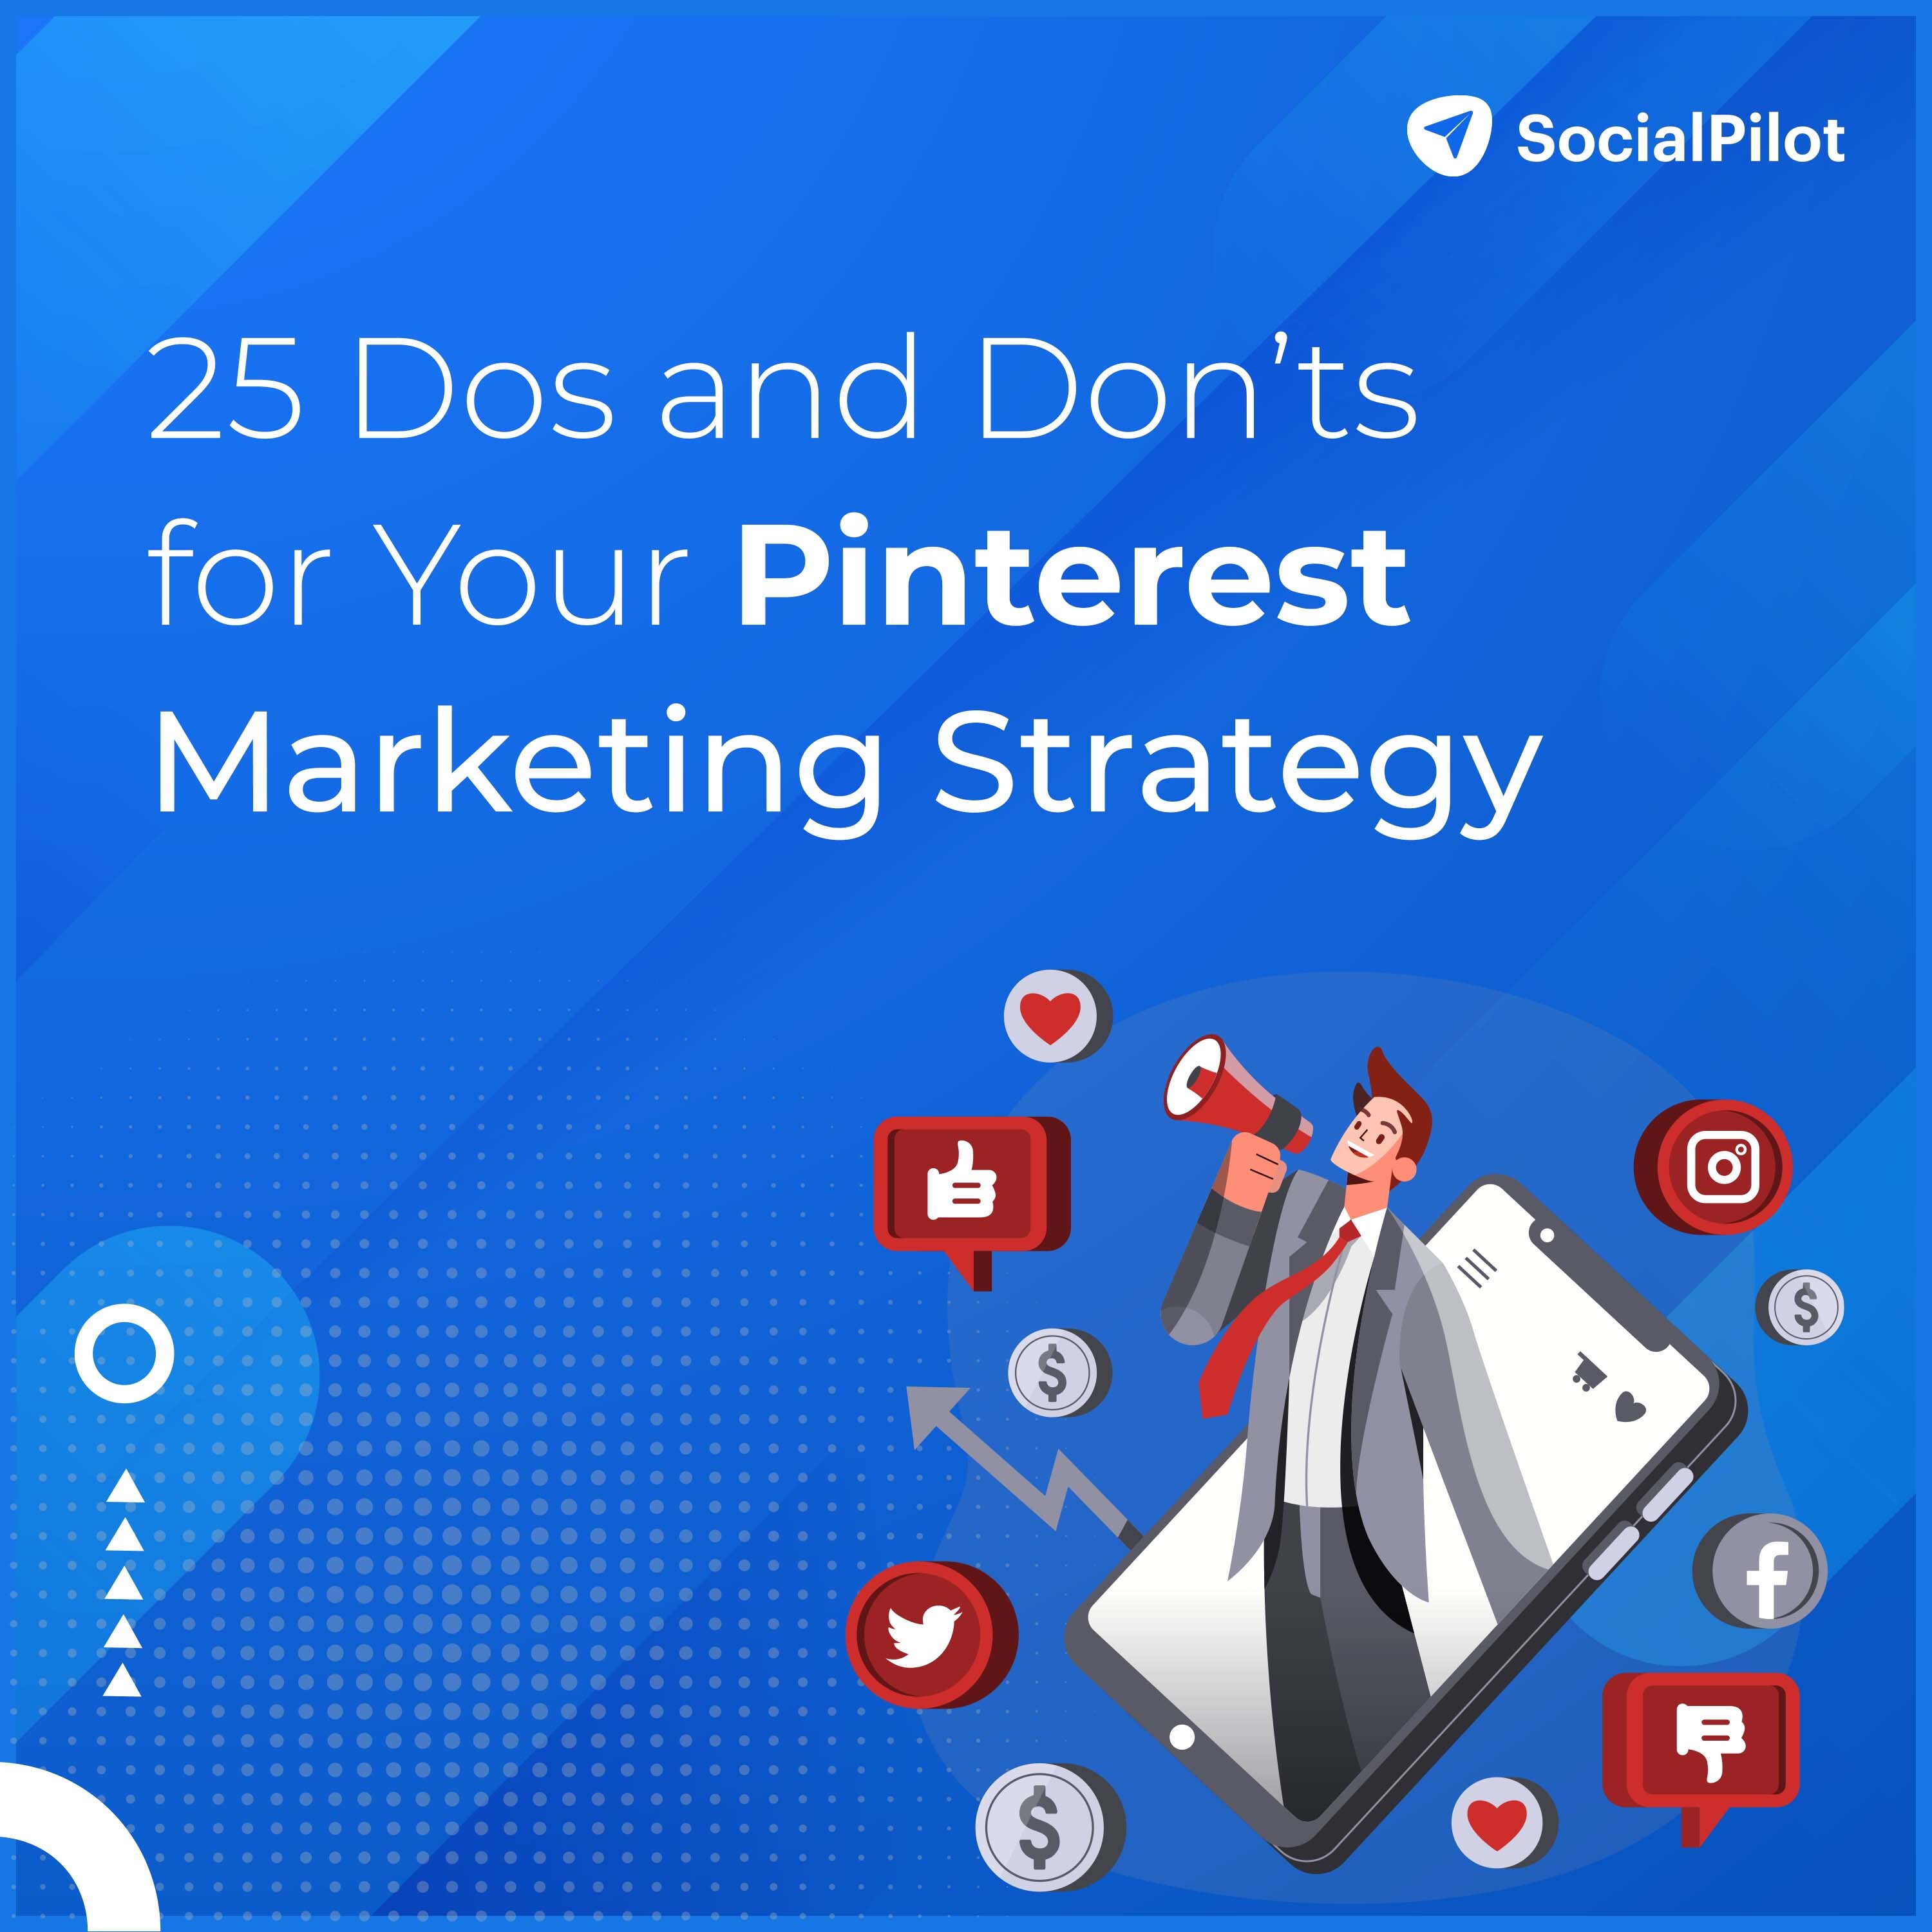 25 Dos and Don’ts for Your Pinterest Marketing Strategy